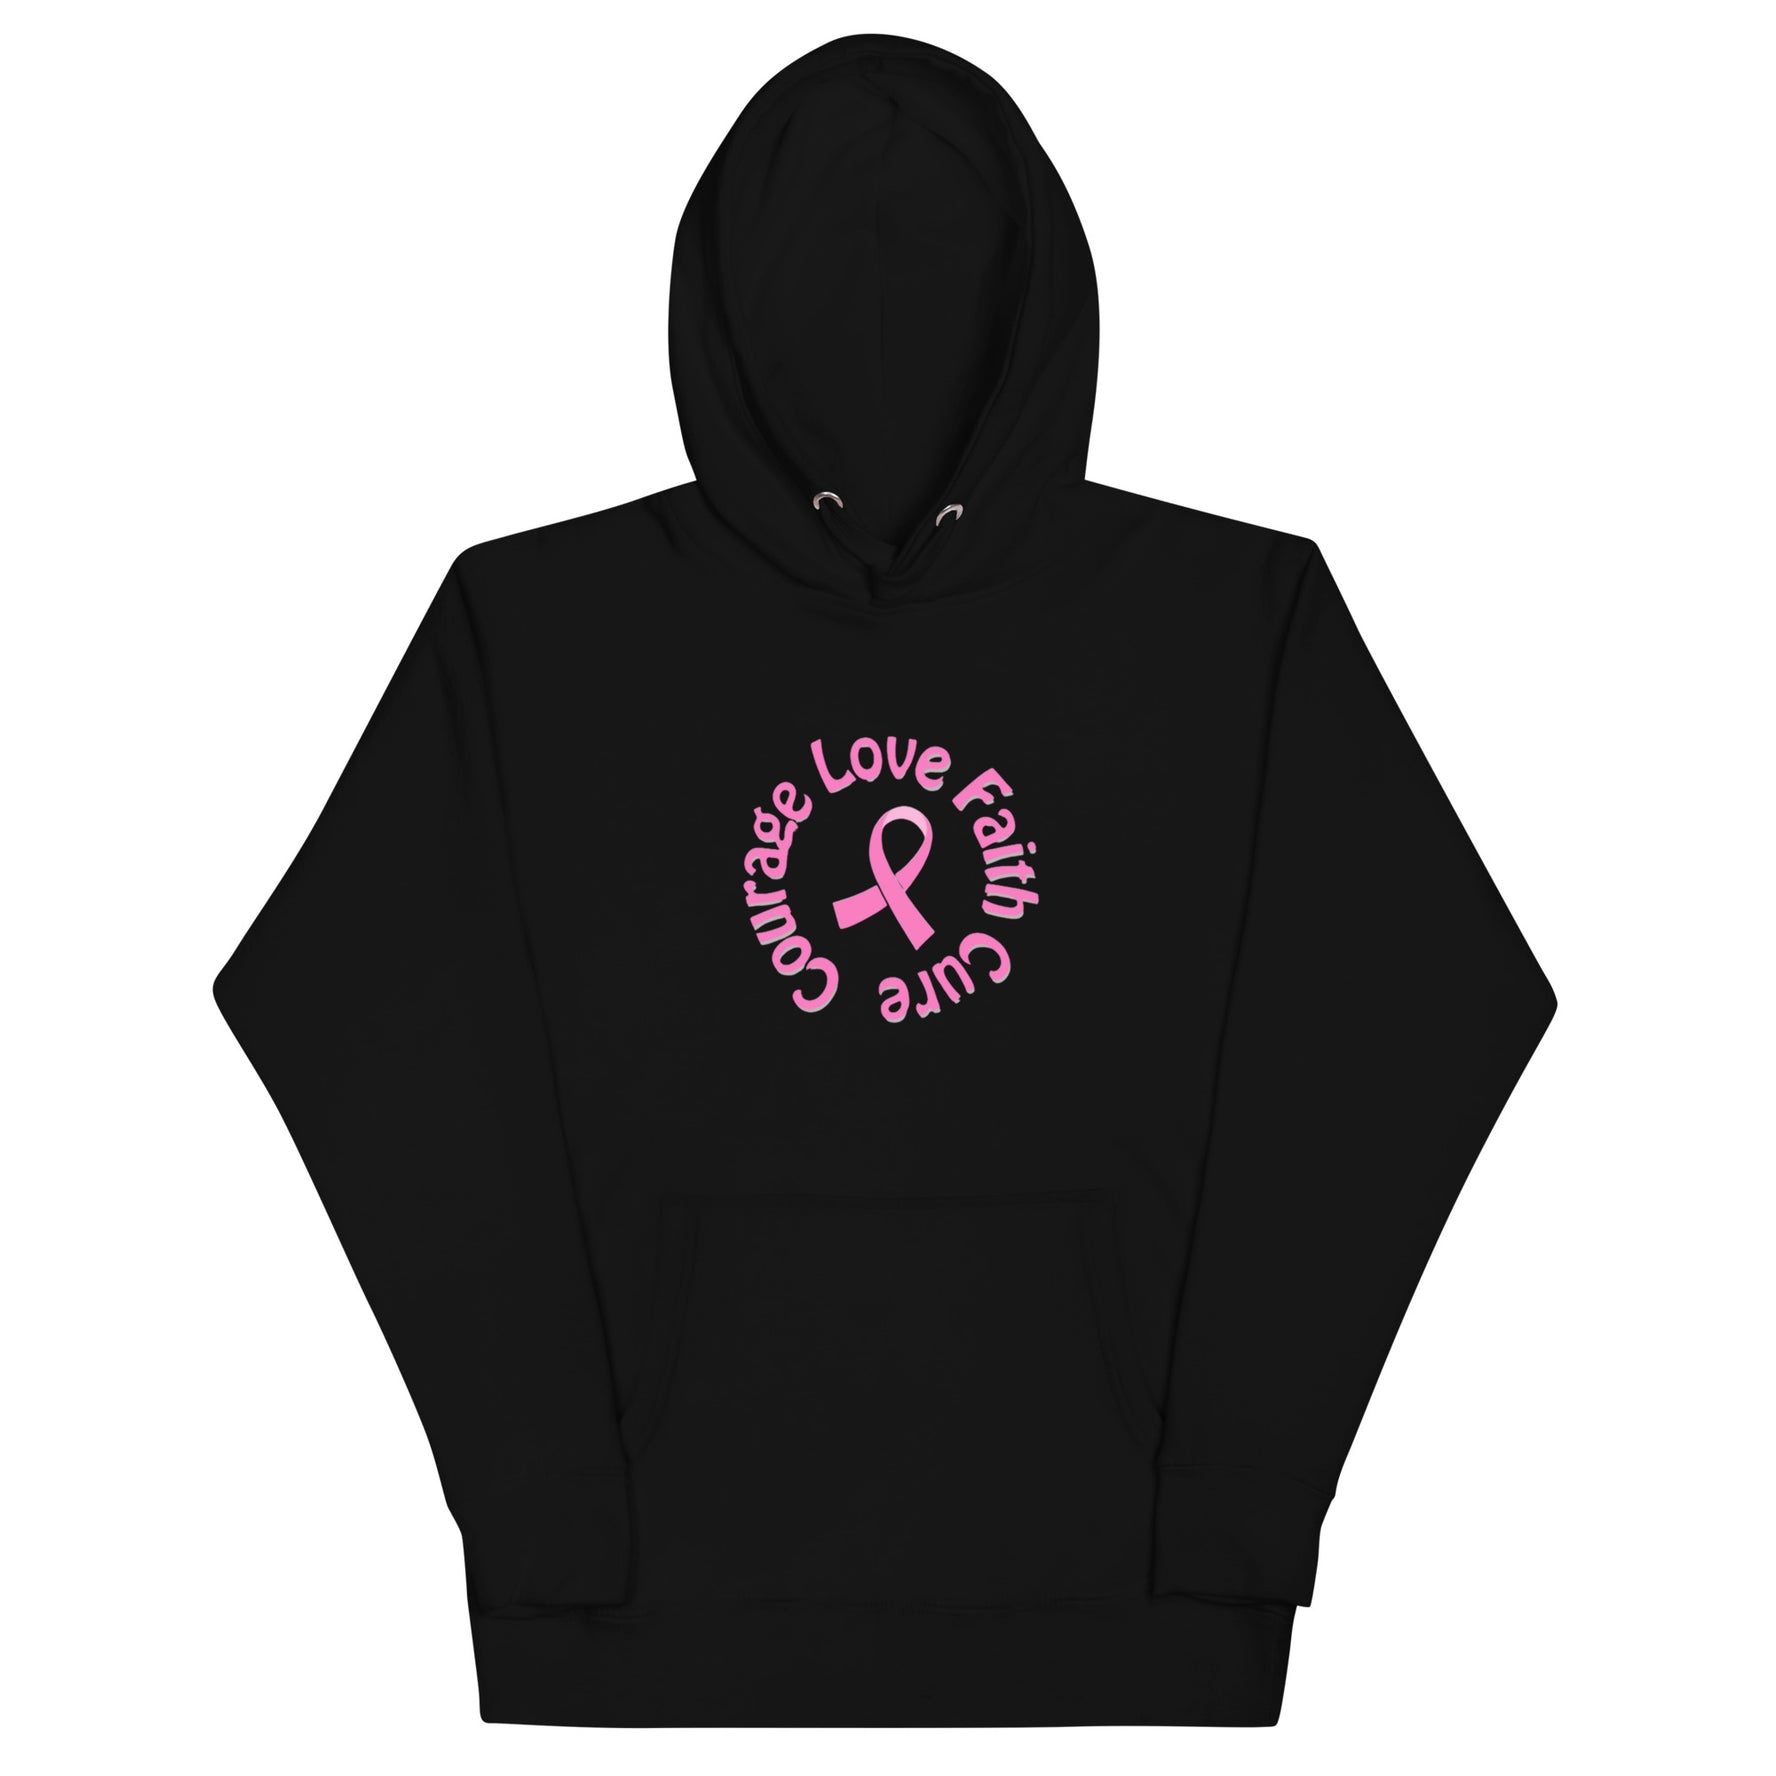 Unisex Hoodie (text in English)